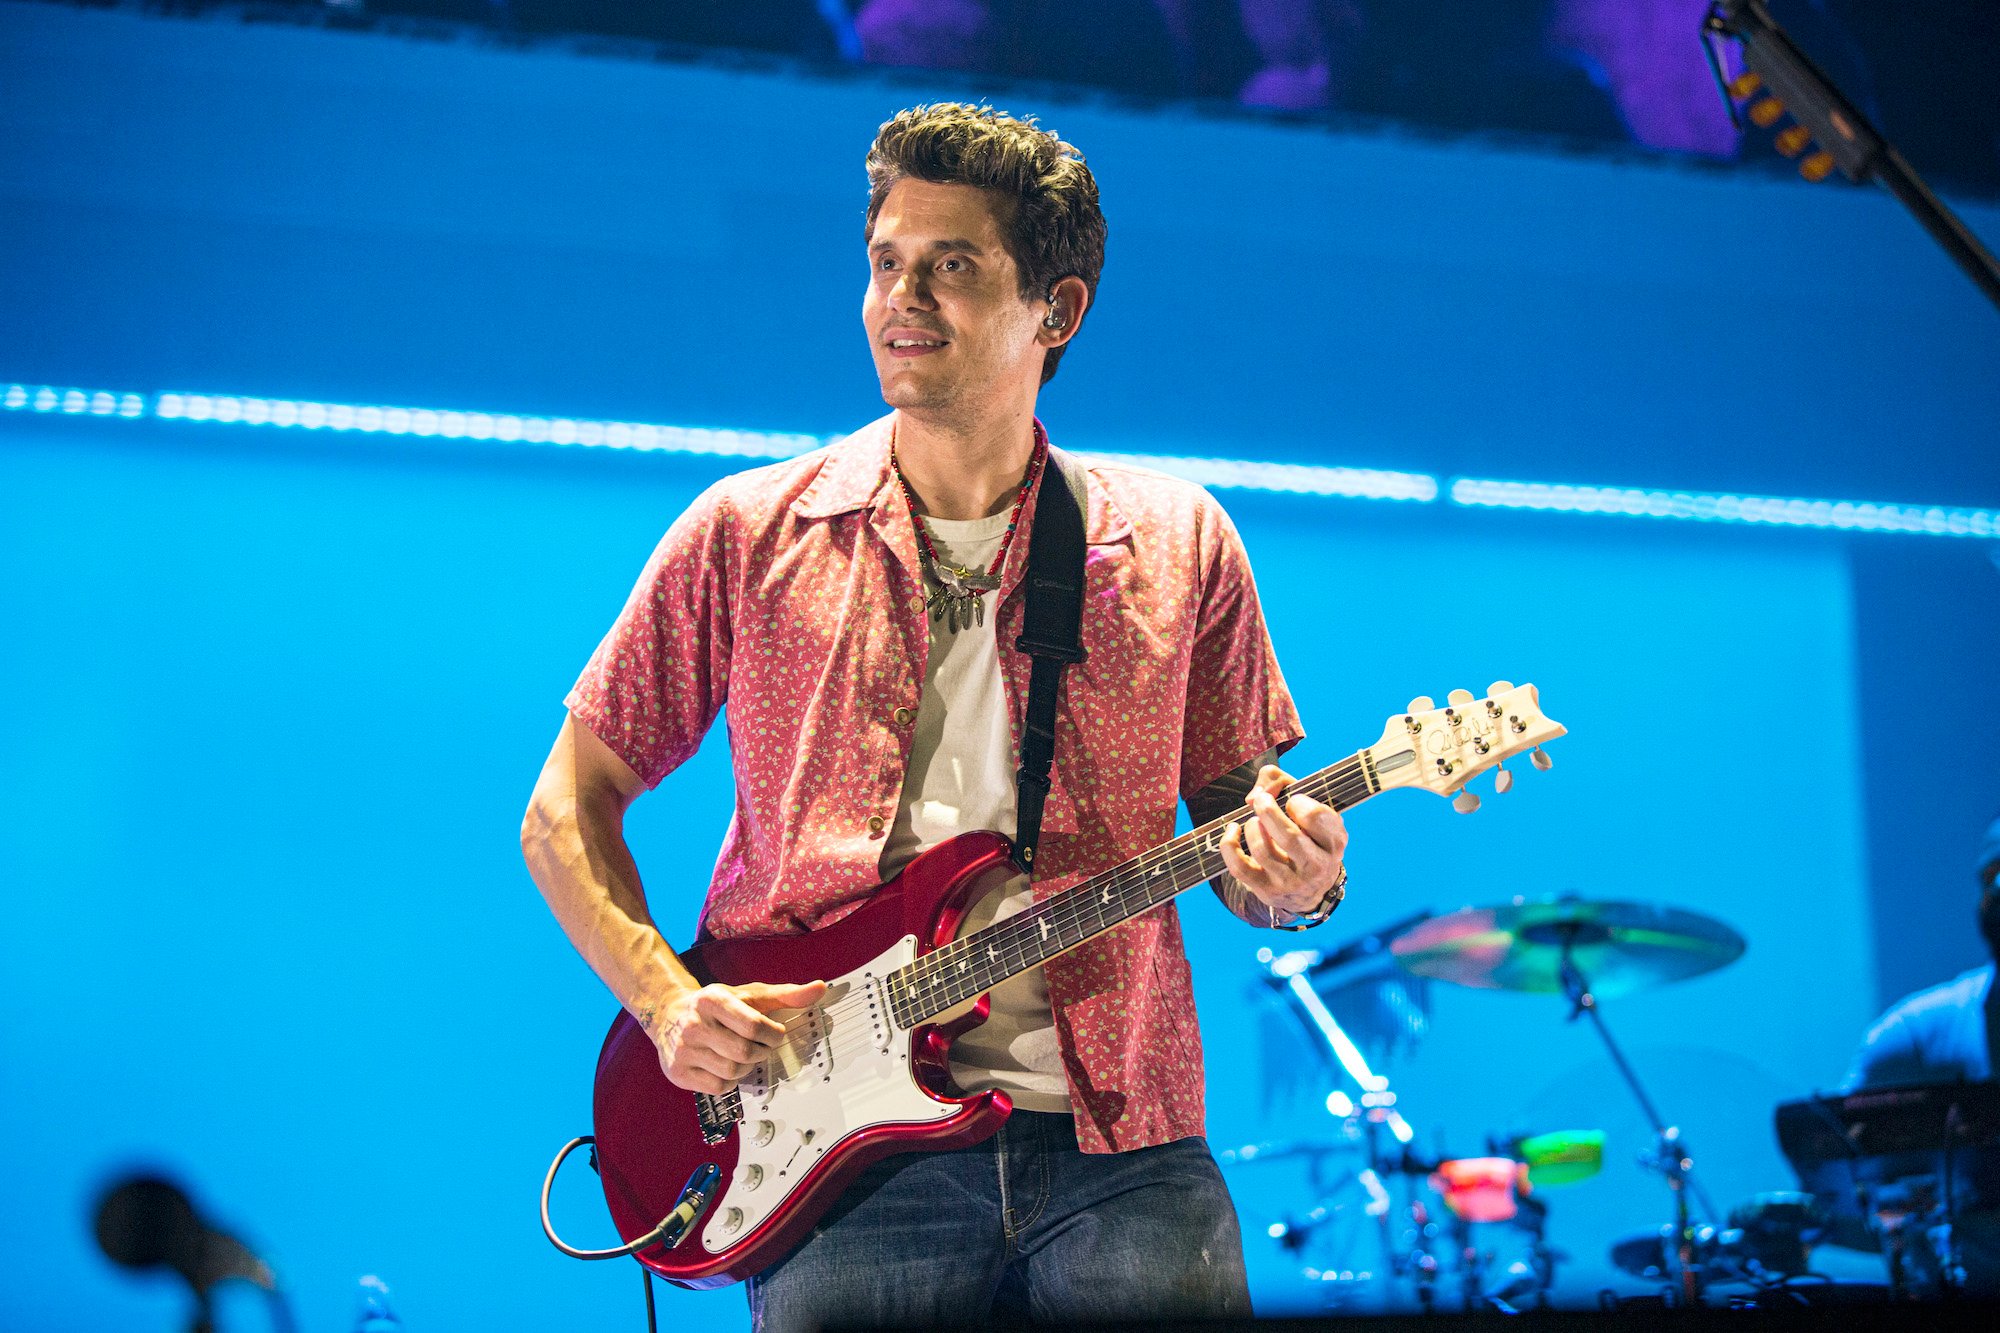 John Mayer performing on stage